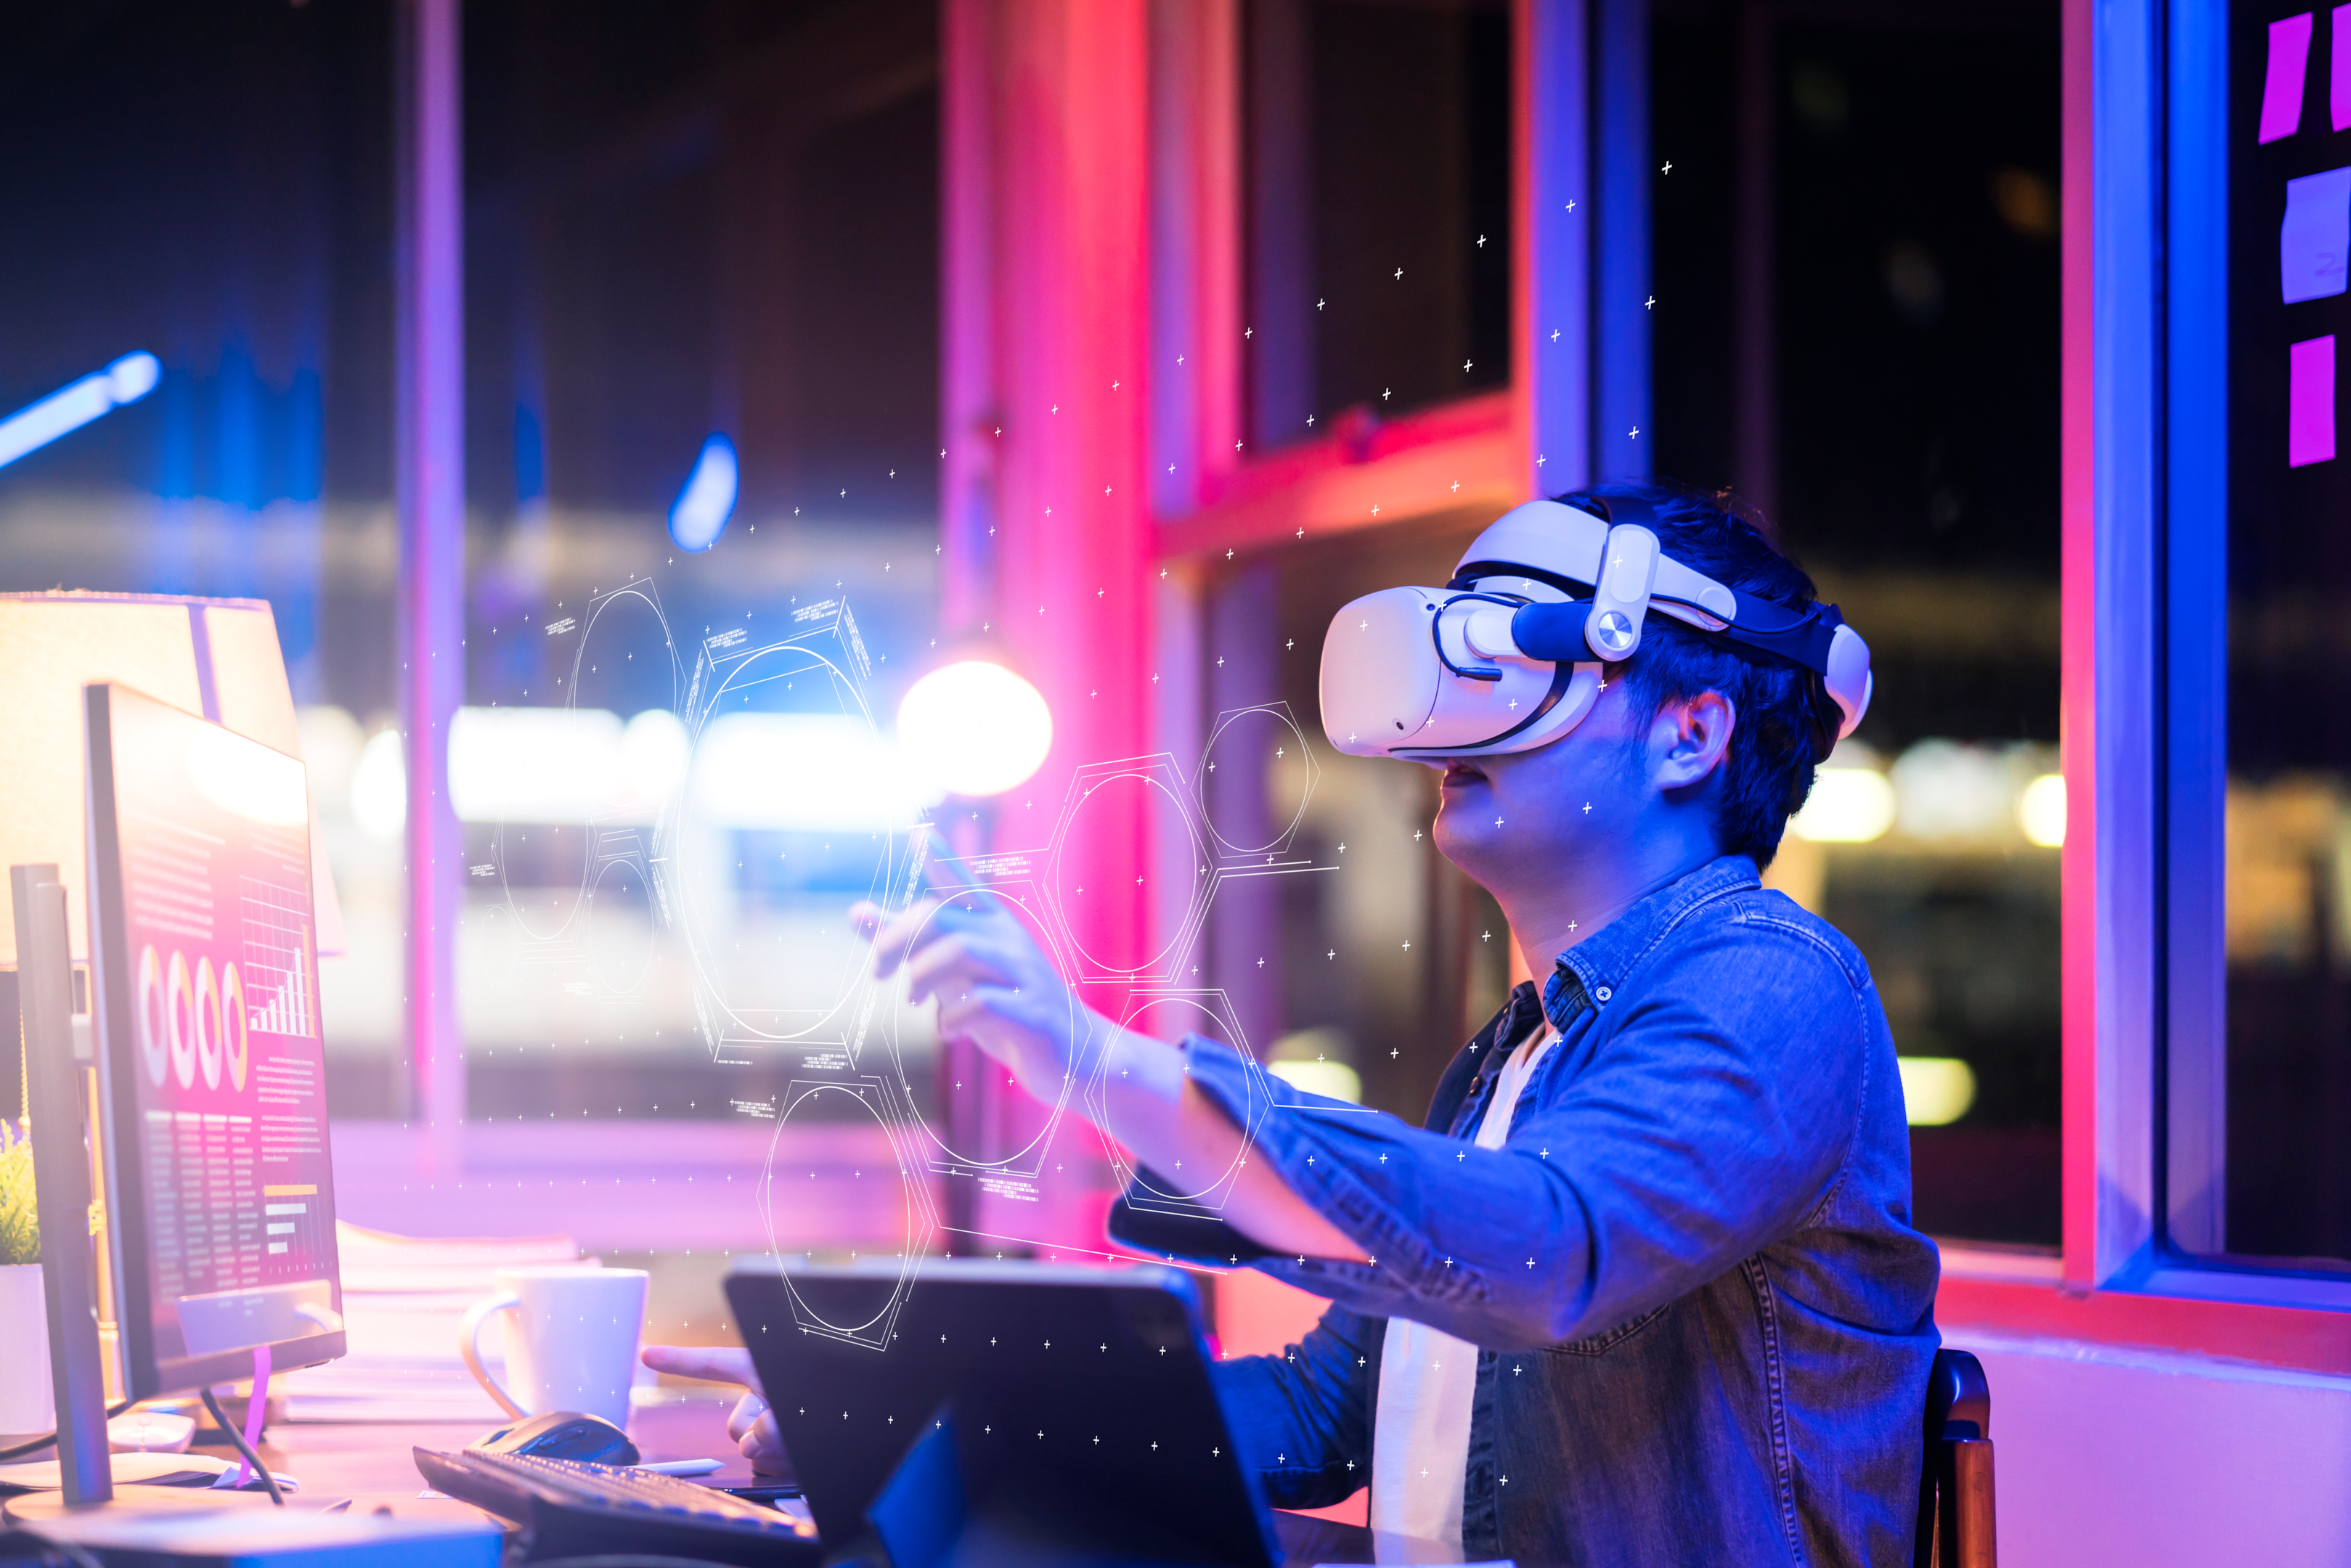 Enhance event experiences with AR and VR as part of the event marketing trends